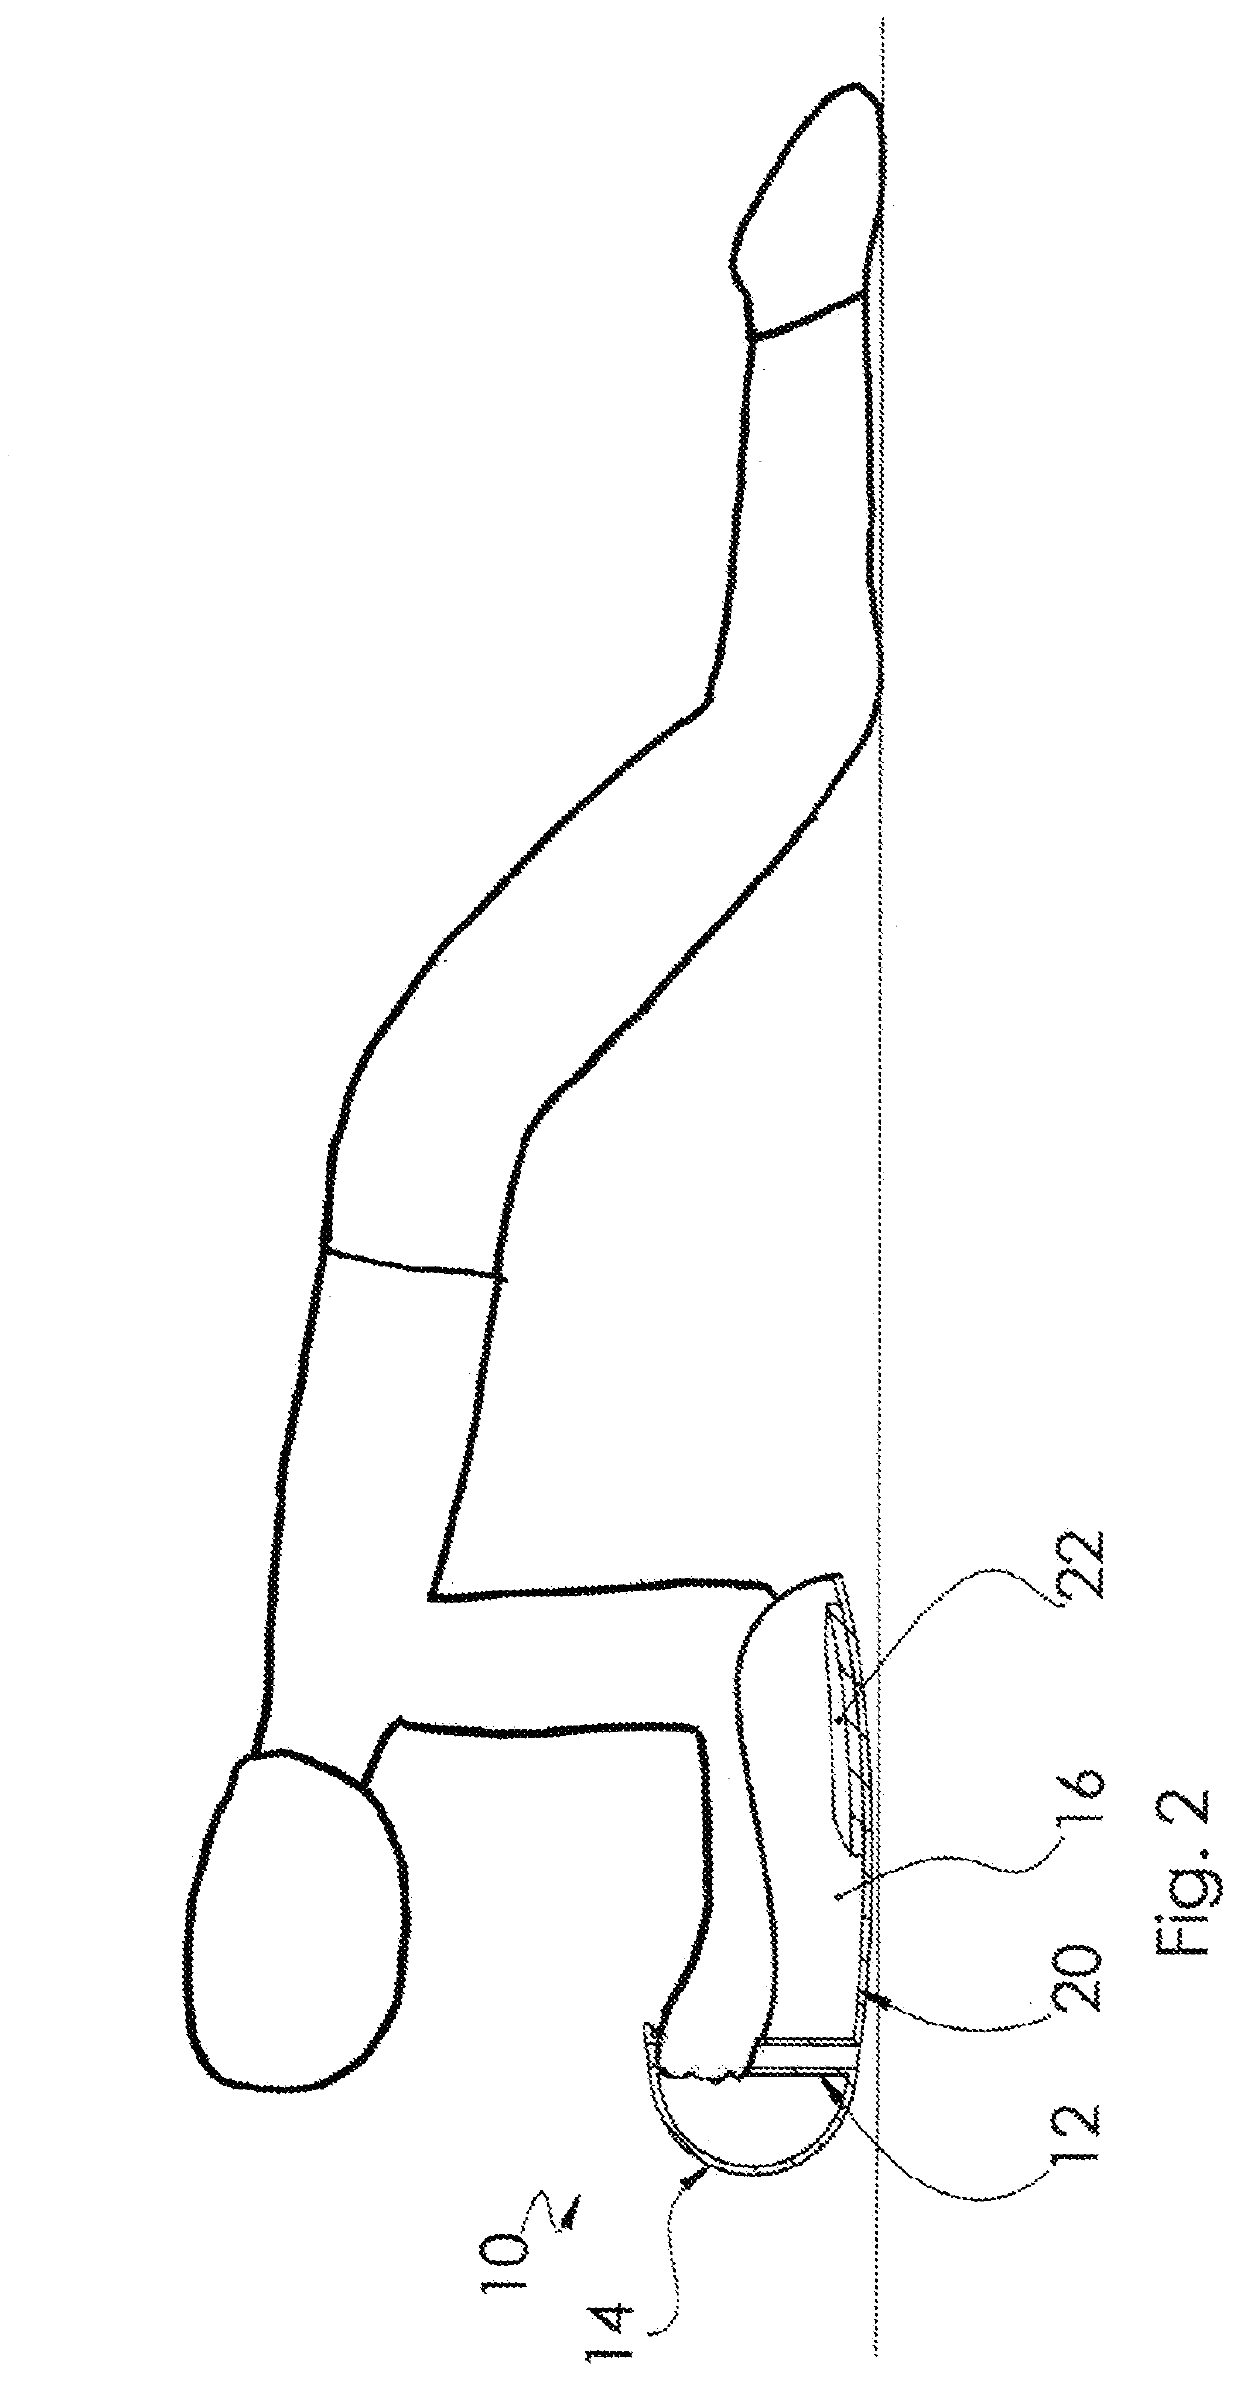 Fitness device with curved sliding or rolling surface covering forearms